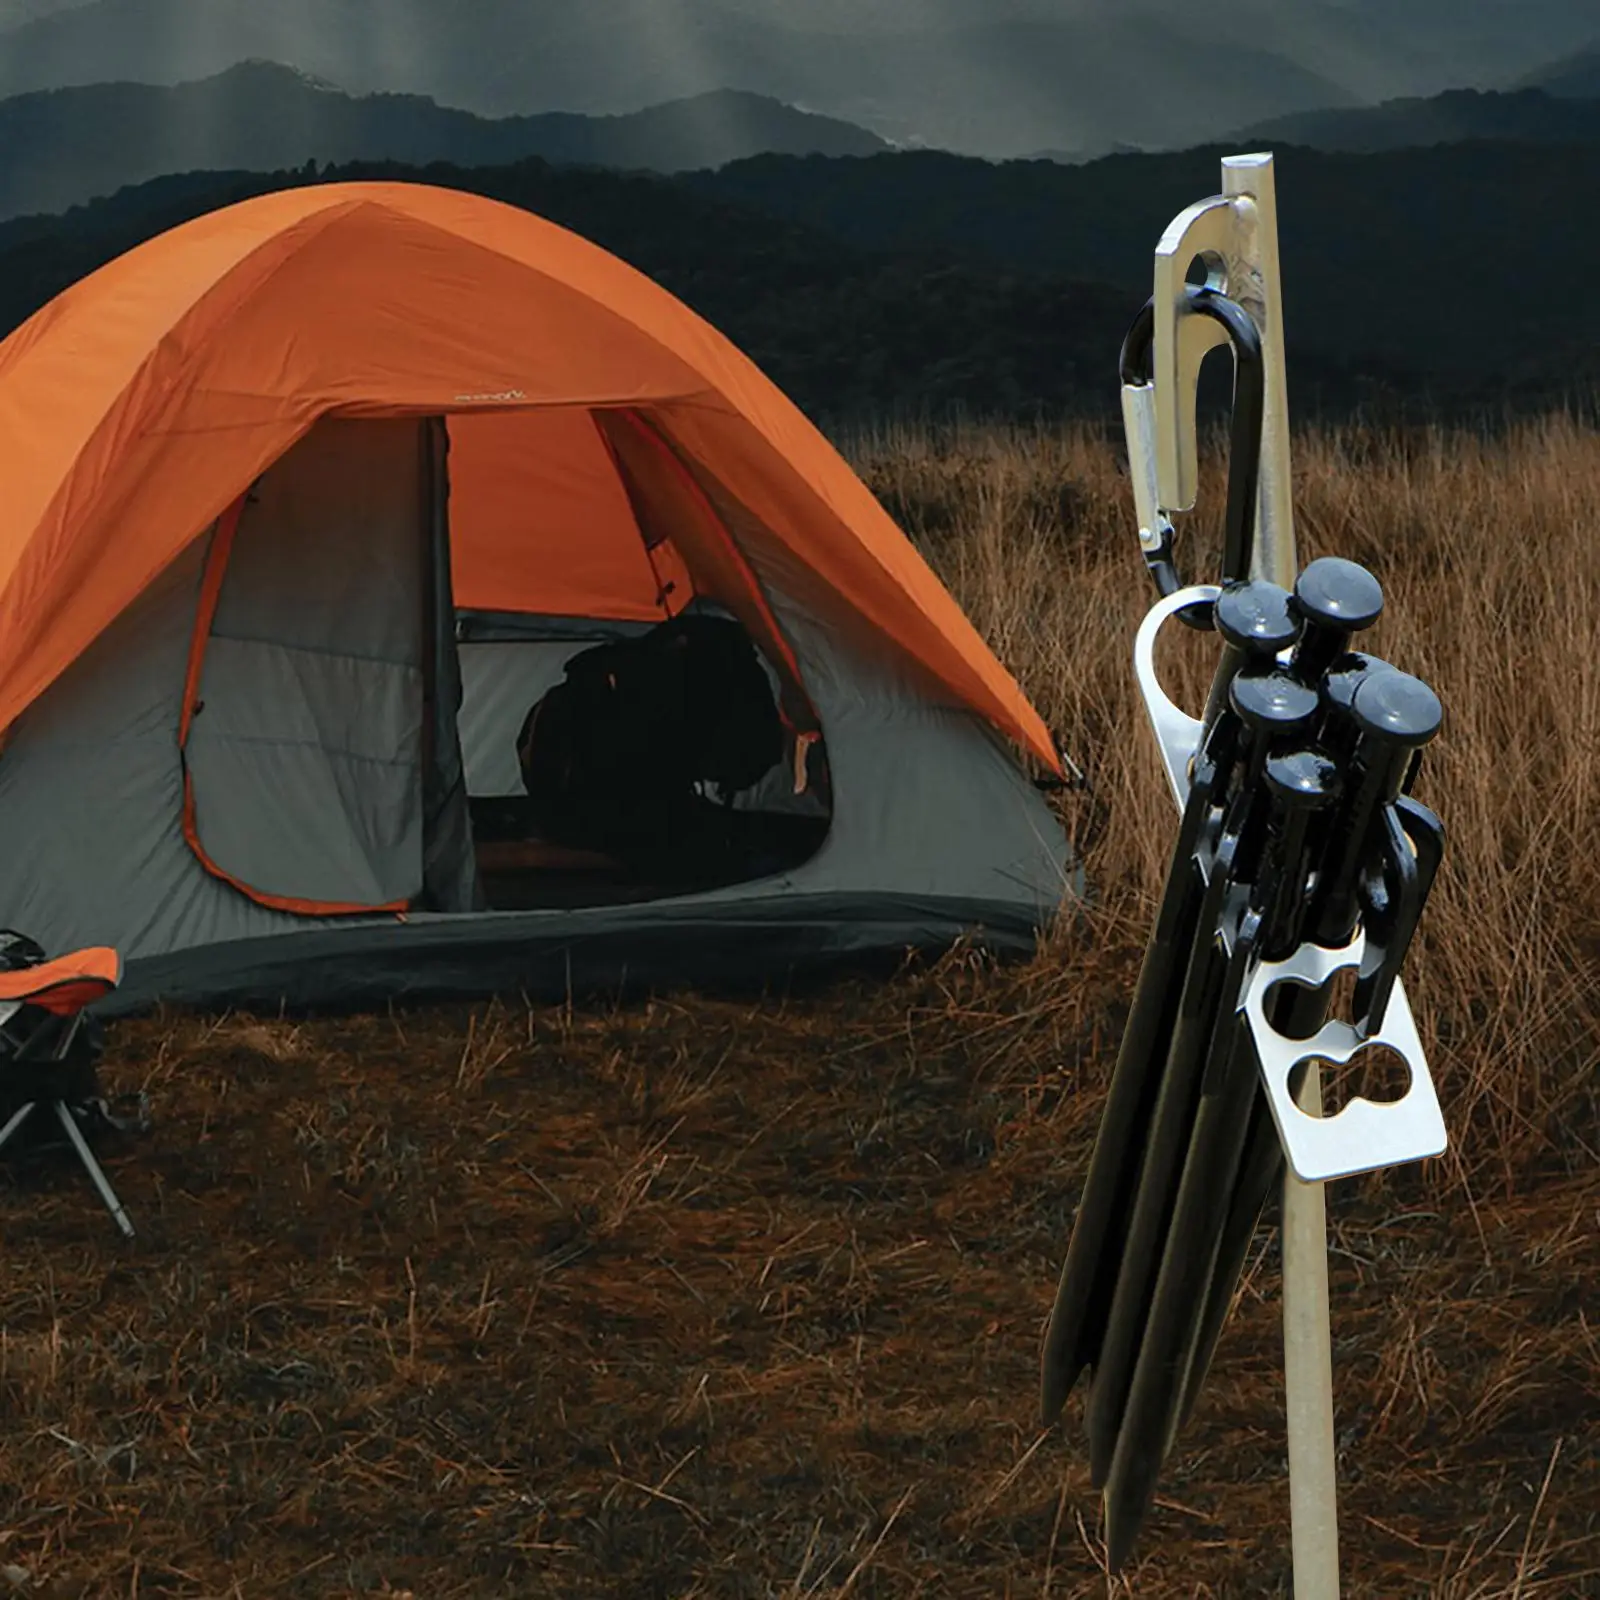 Stainless Steel Tent Pegs Storage Pegs Holder Holder Ground Nail Container Portable for Hiking